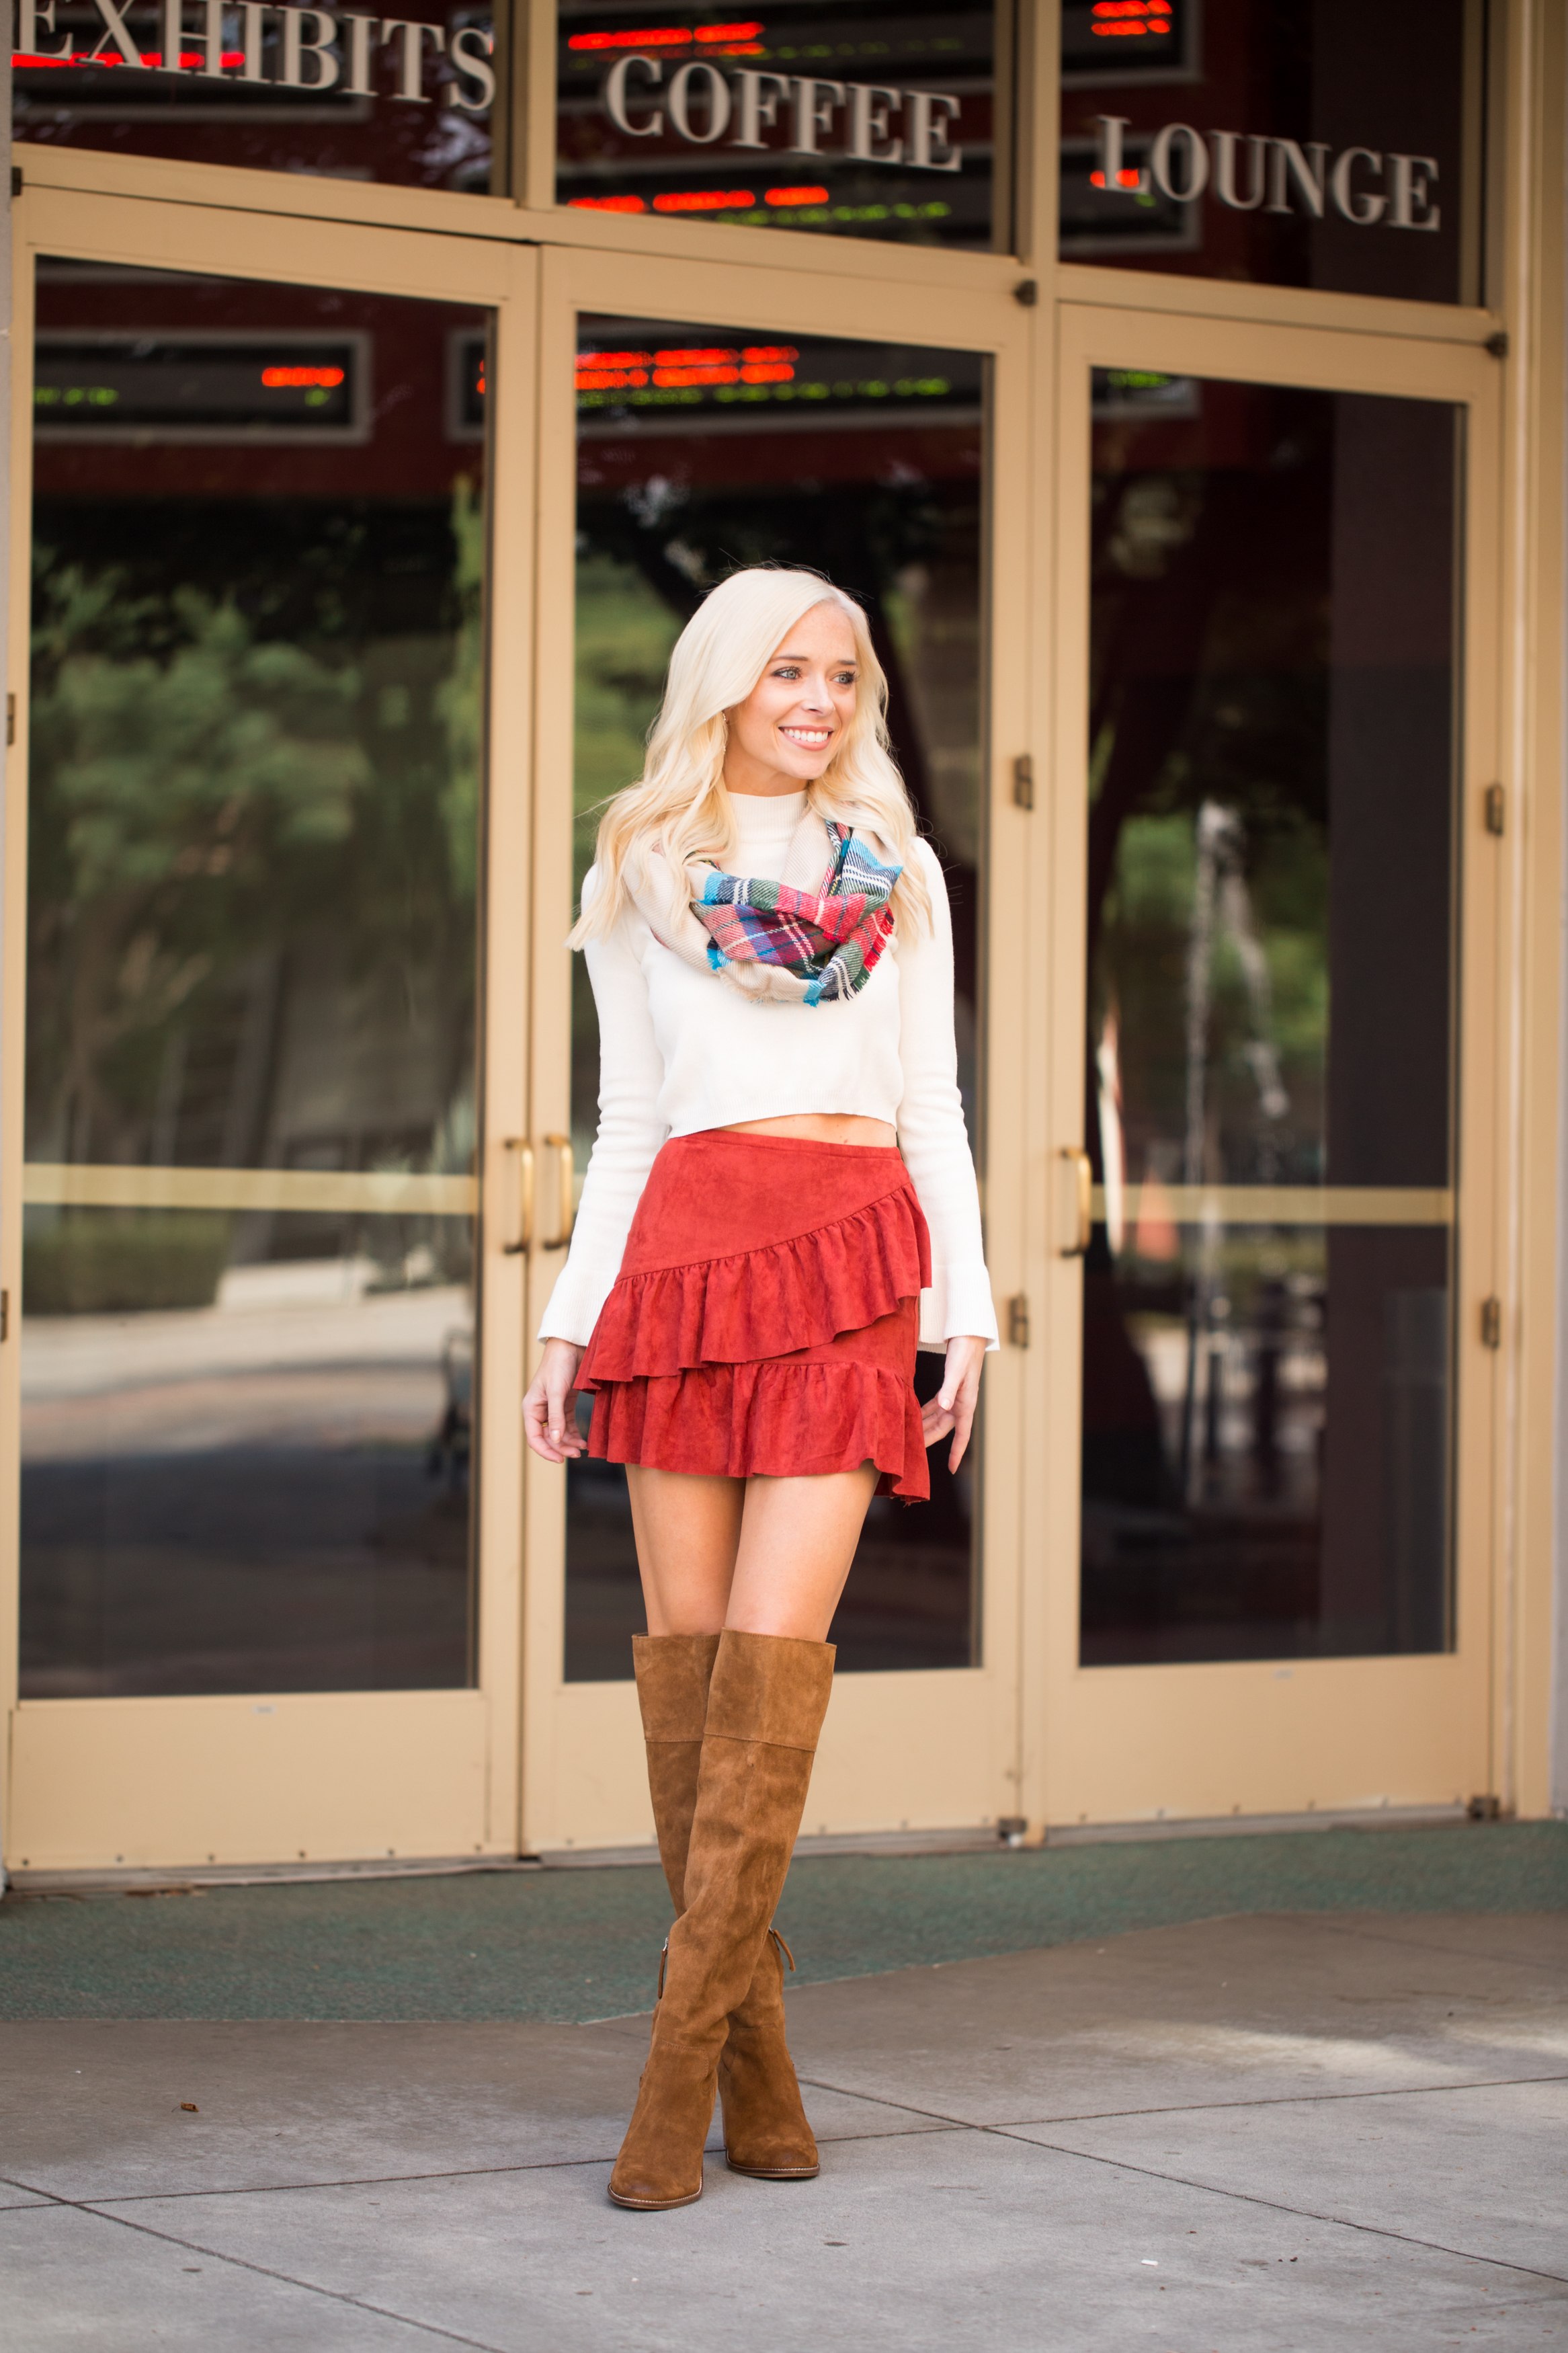 My Favorite Fall Look | OTK Boots, Ruffle Mini-skirts and Scarves